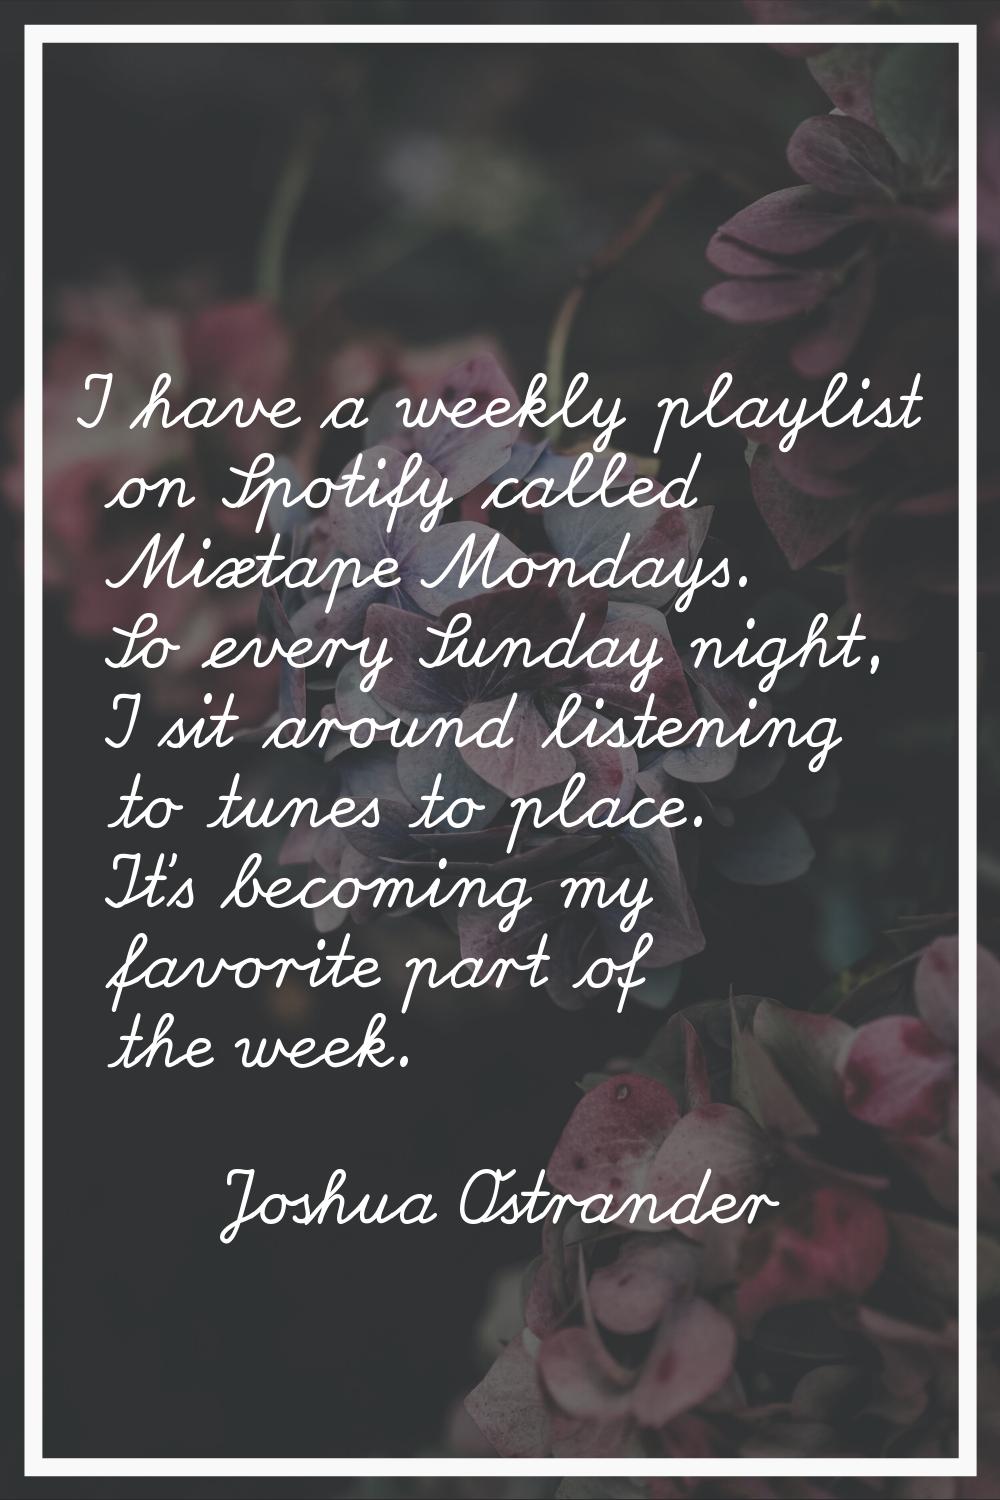 I have a weekly playlist on Spotify called Mixtape Mondays. So every Sunday night, I sit around lis